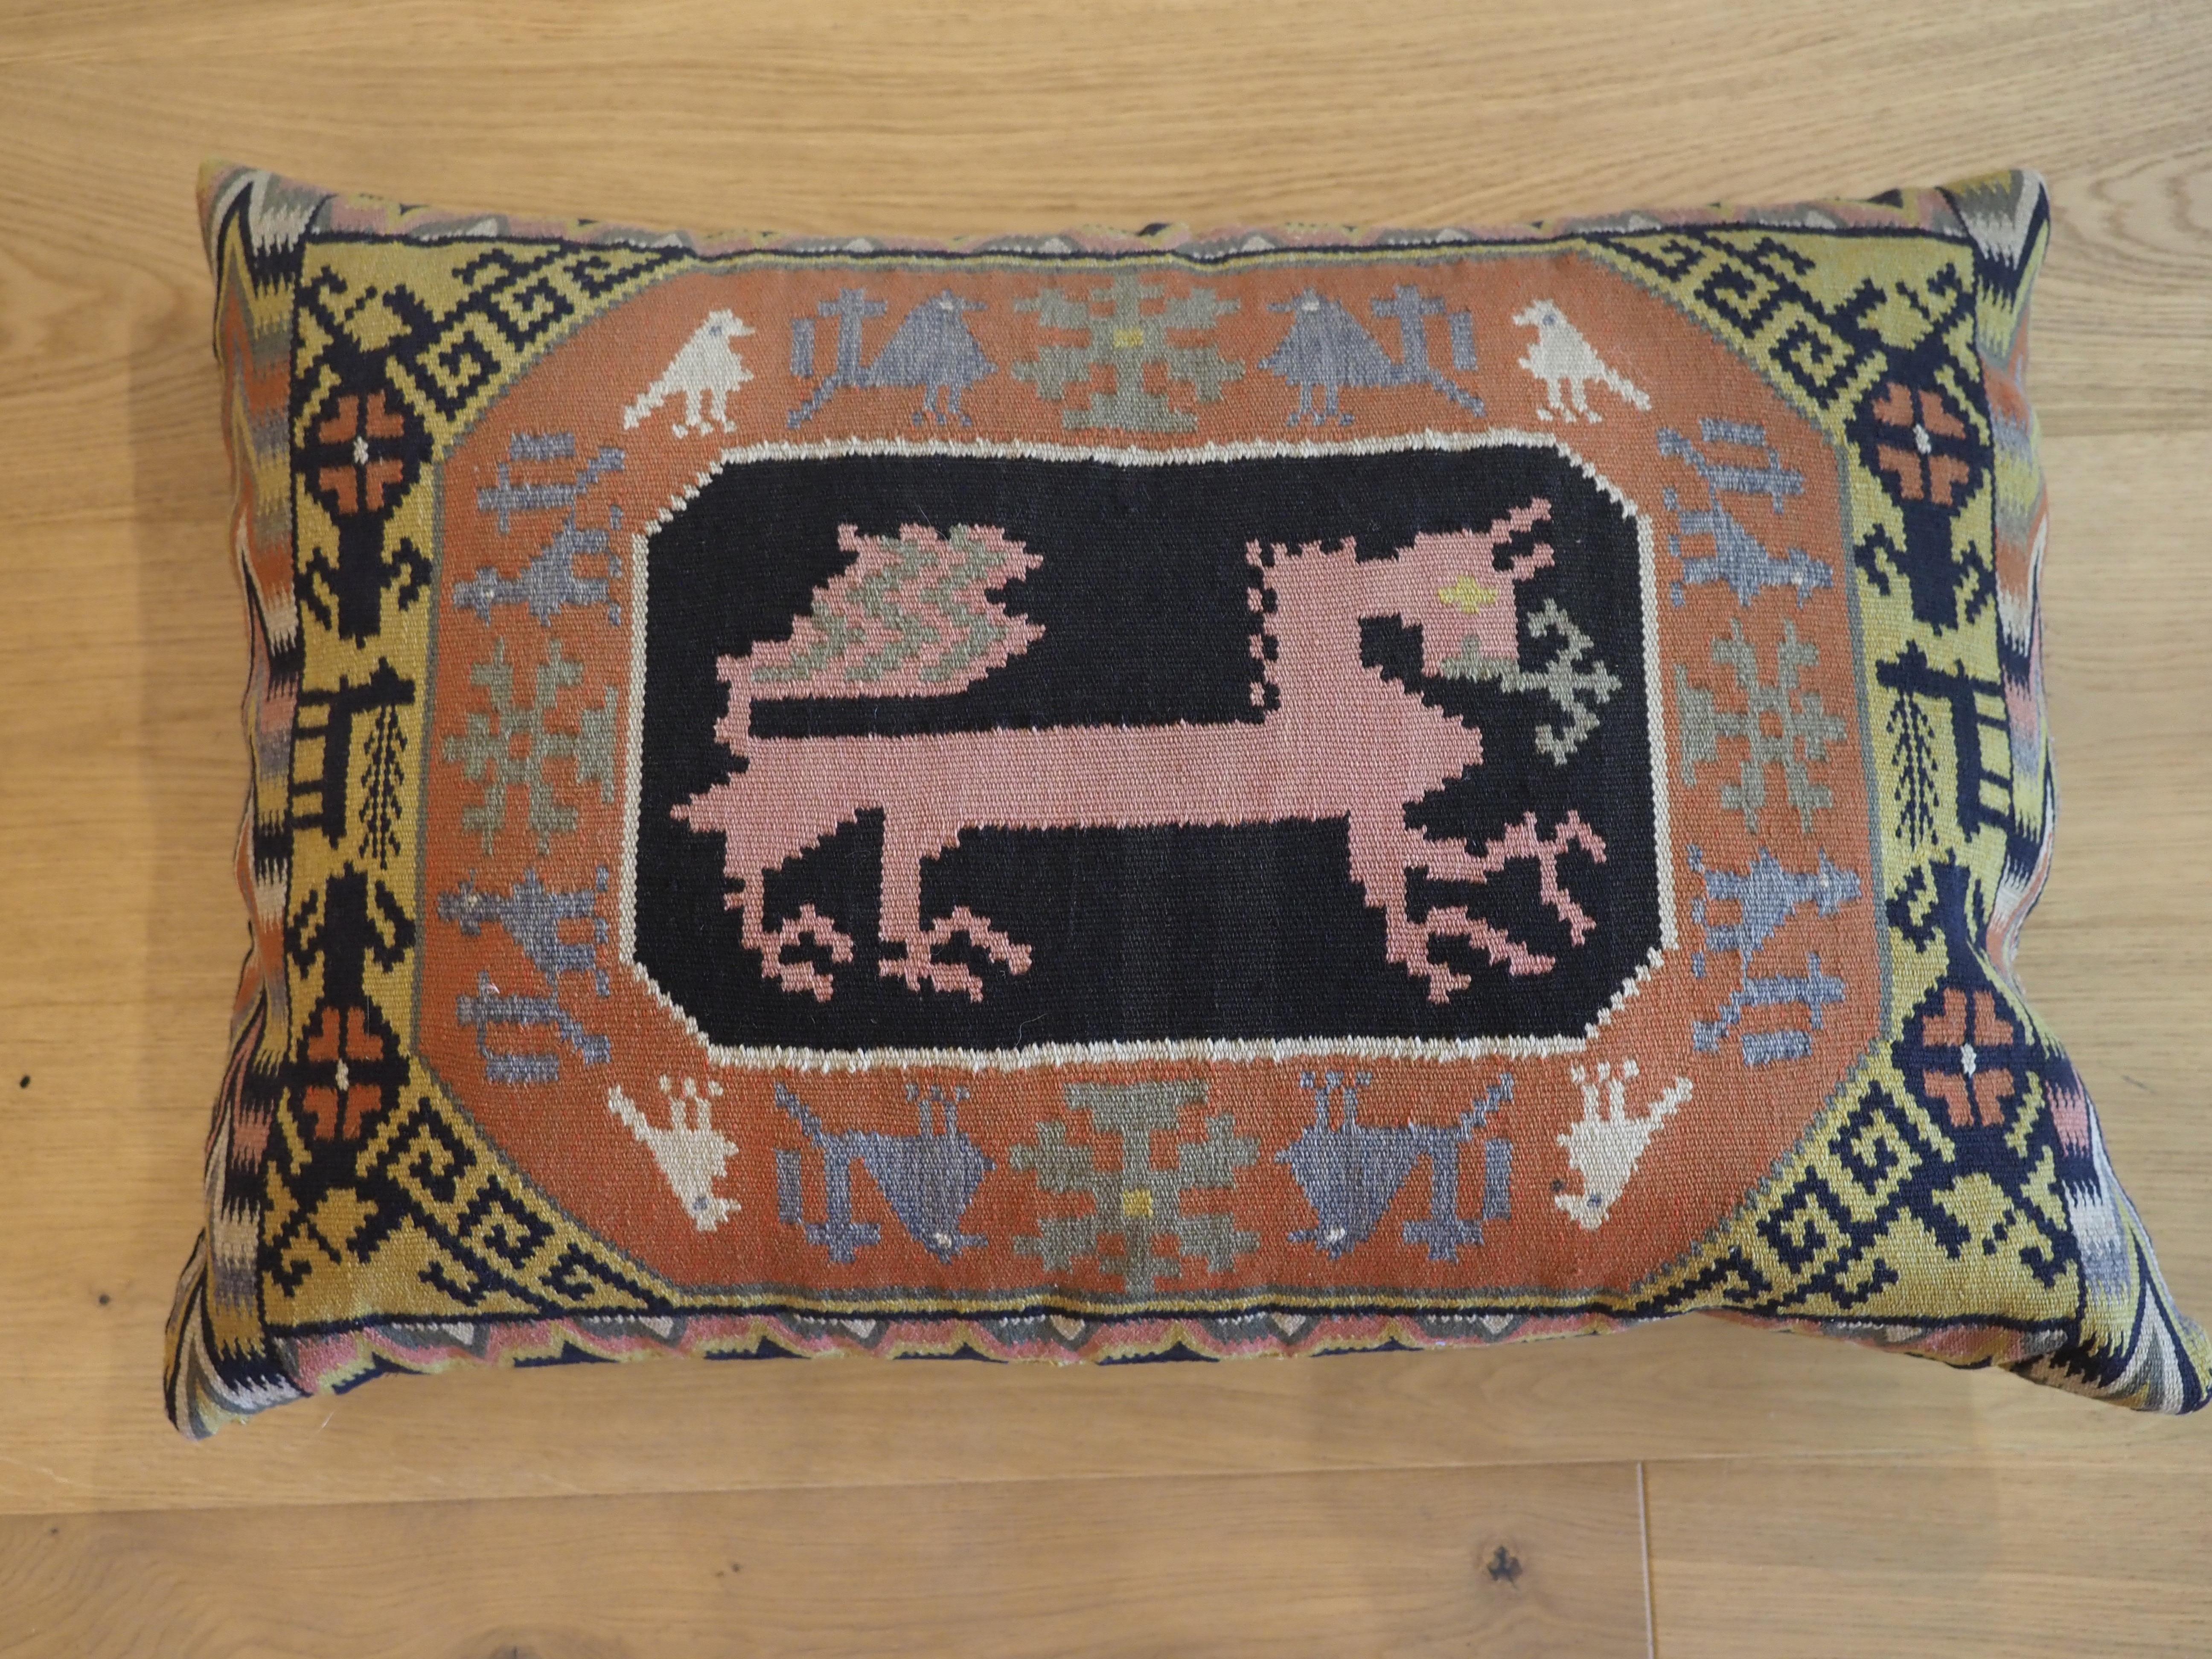 Size: 2ft 4in x 1ft 7in (70 x 48cm).

Antique Swedish carriage cushion, filled and ready for use.

Mid 19th century.

This beautiful carriage cushion has a truly outstanding design with a single large animal.... maybe a horse; surrounded by small